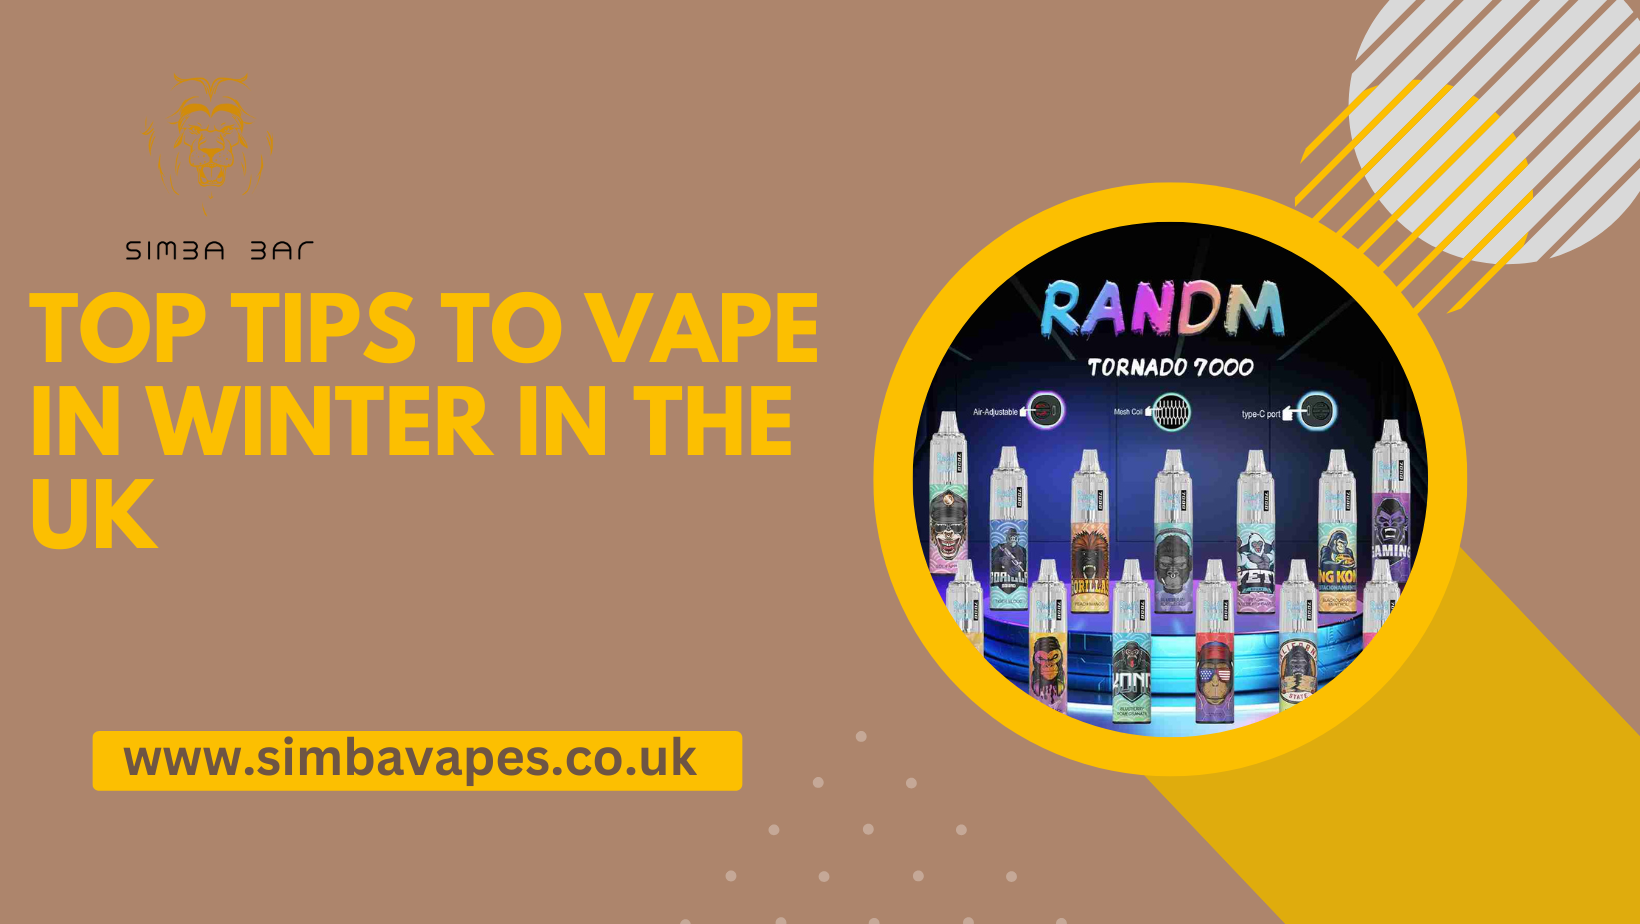 Top Tips to Vape in Winter in the UK